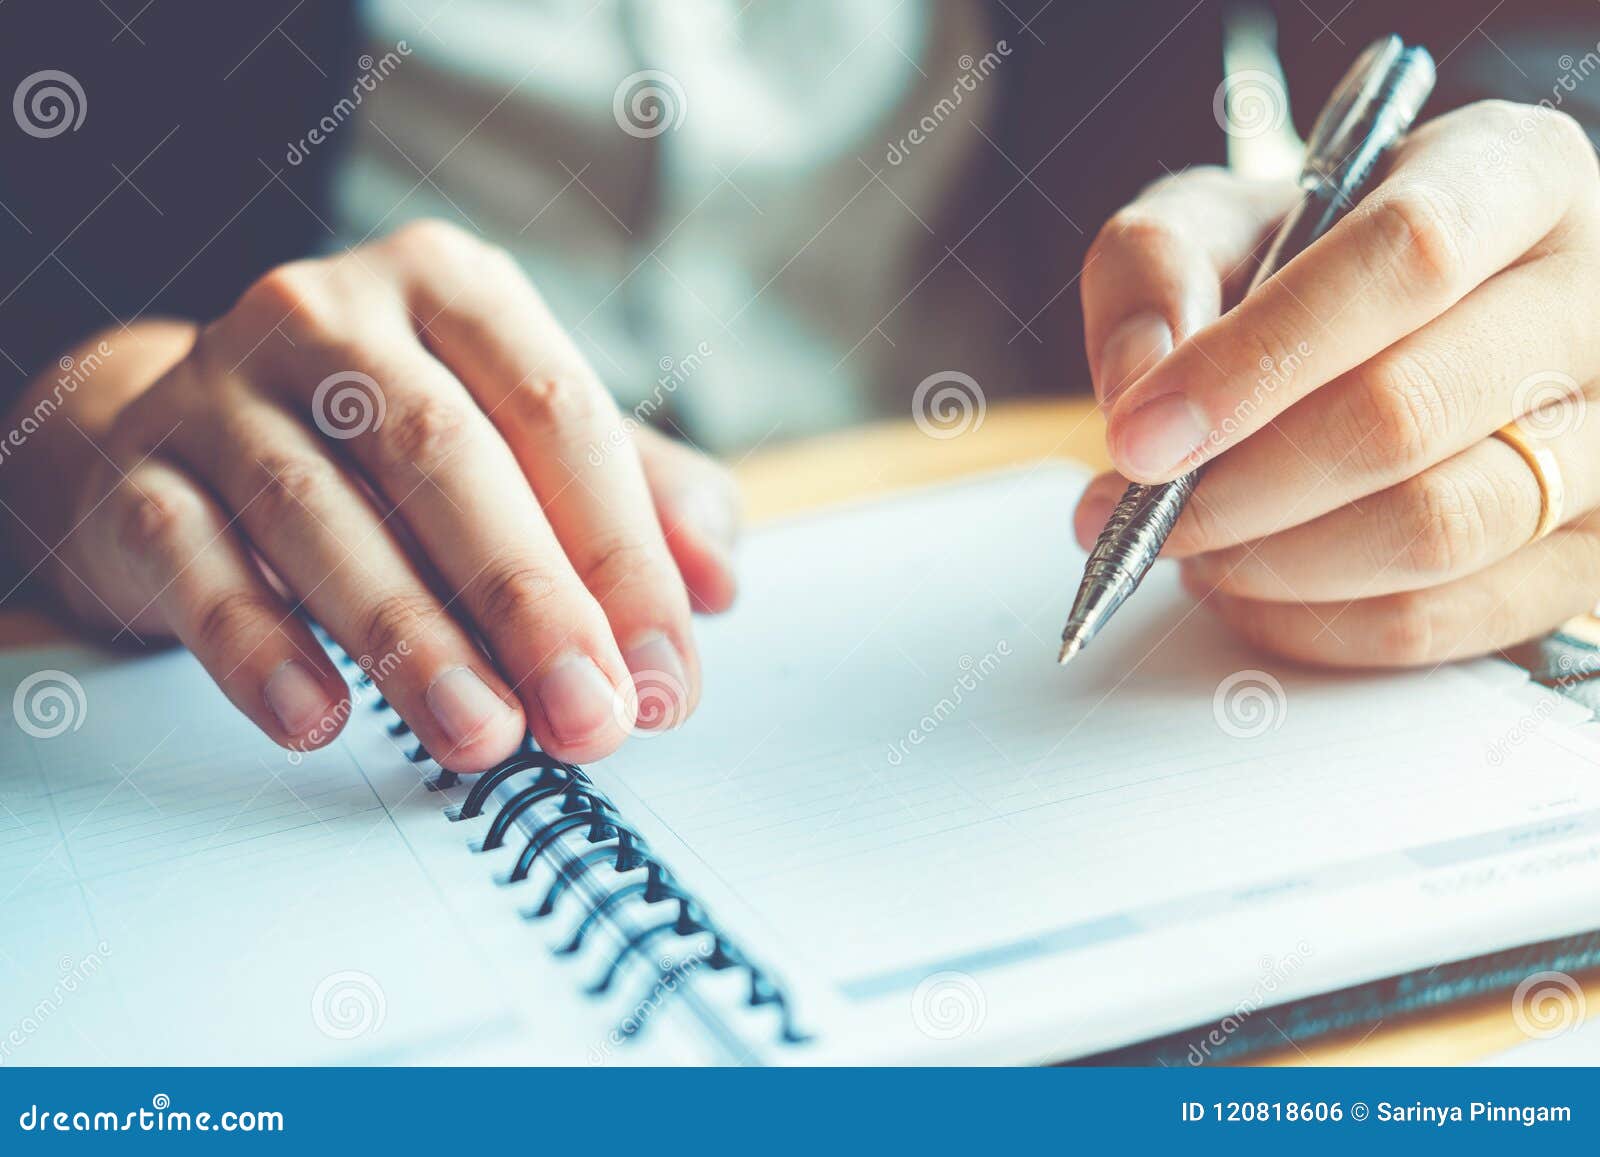 business man holding pen pointing on summary report chart